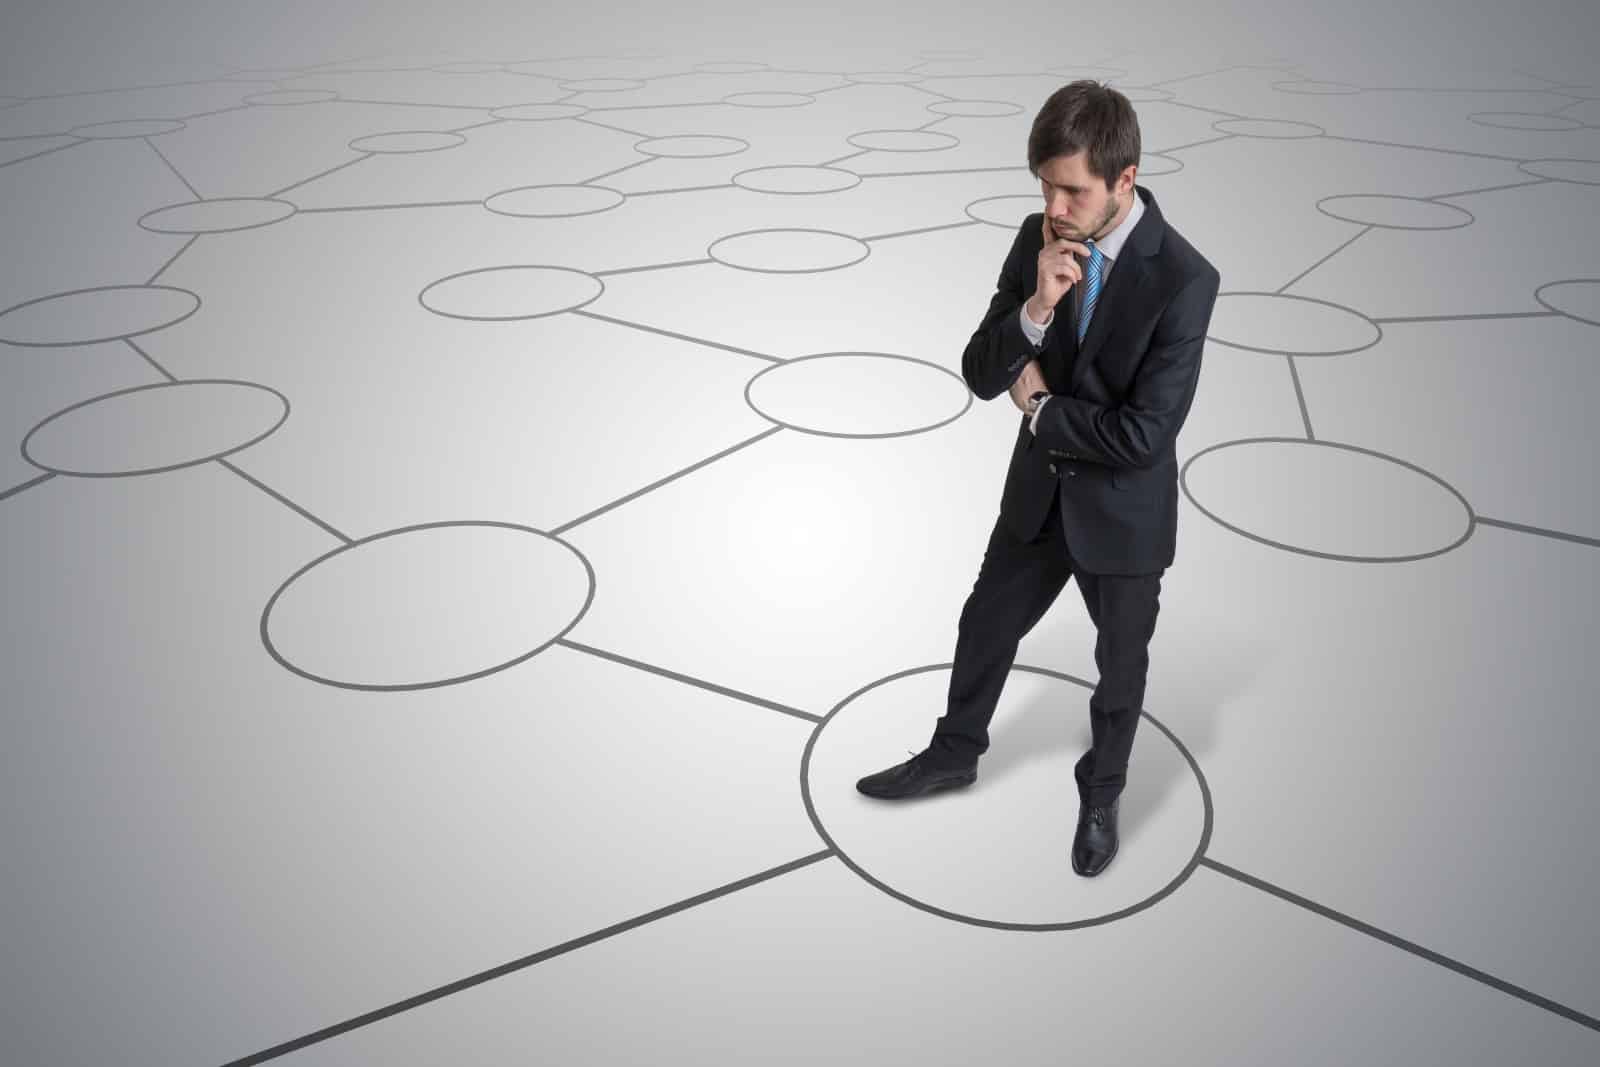 Man In Suit Contemplating Connected Circles On Ground